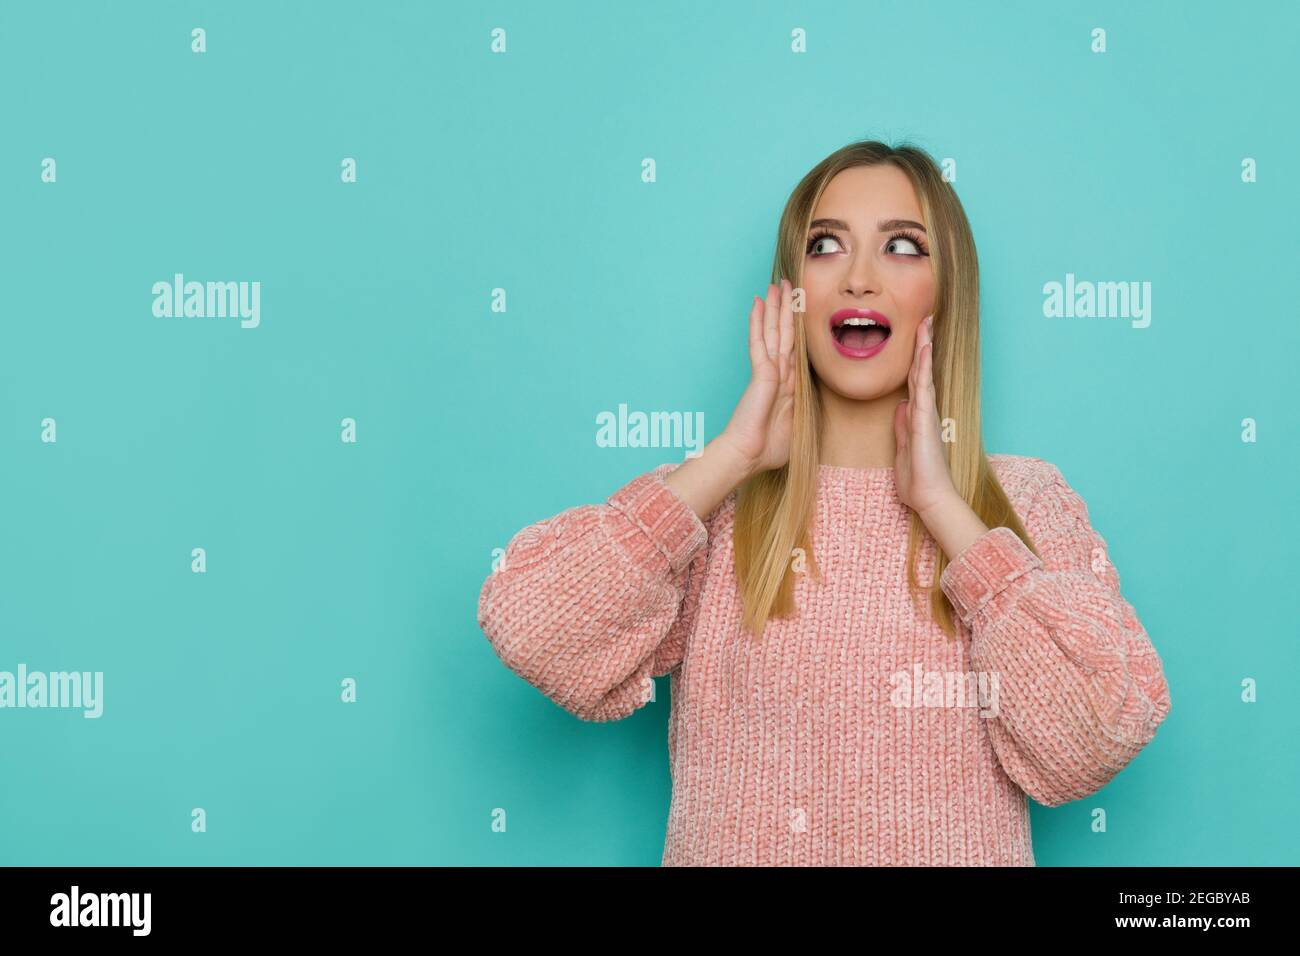 Surprised young woman in pink sweater is holding head in hands, looking at the side and talking. Front view. Waist up studio shot on turquoise backgro Stock Photo